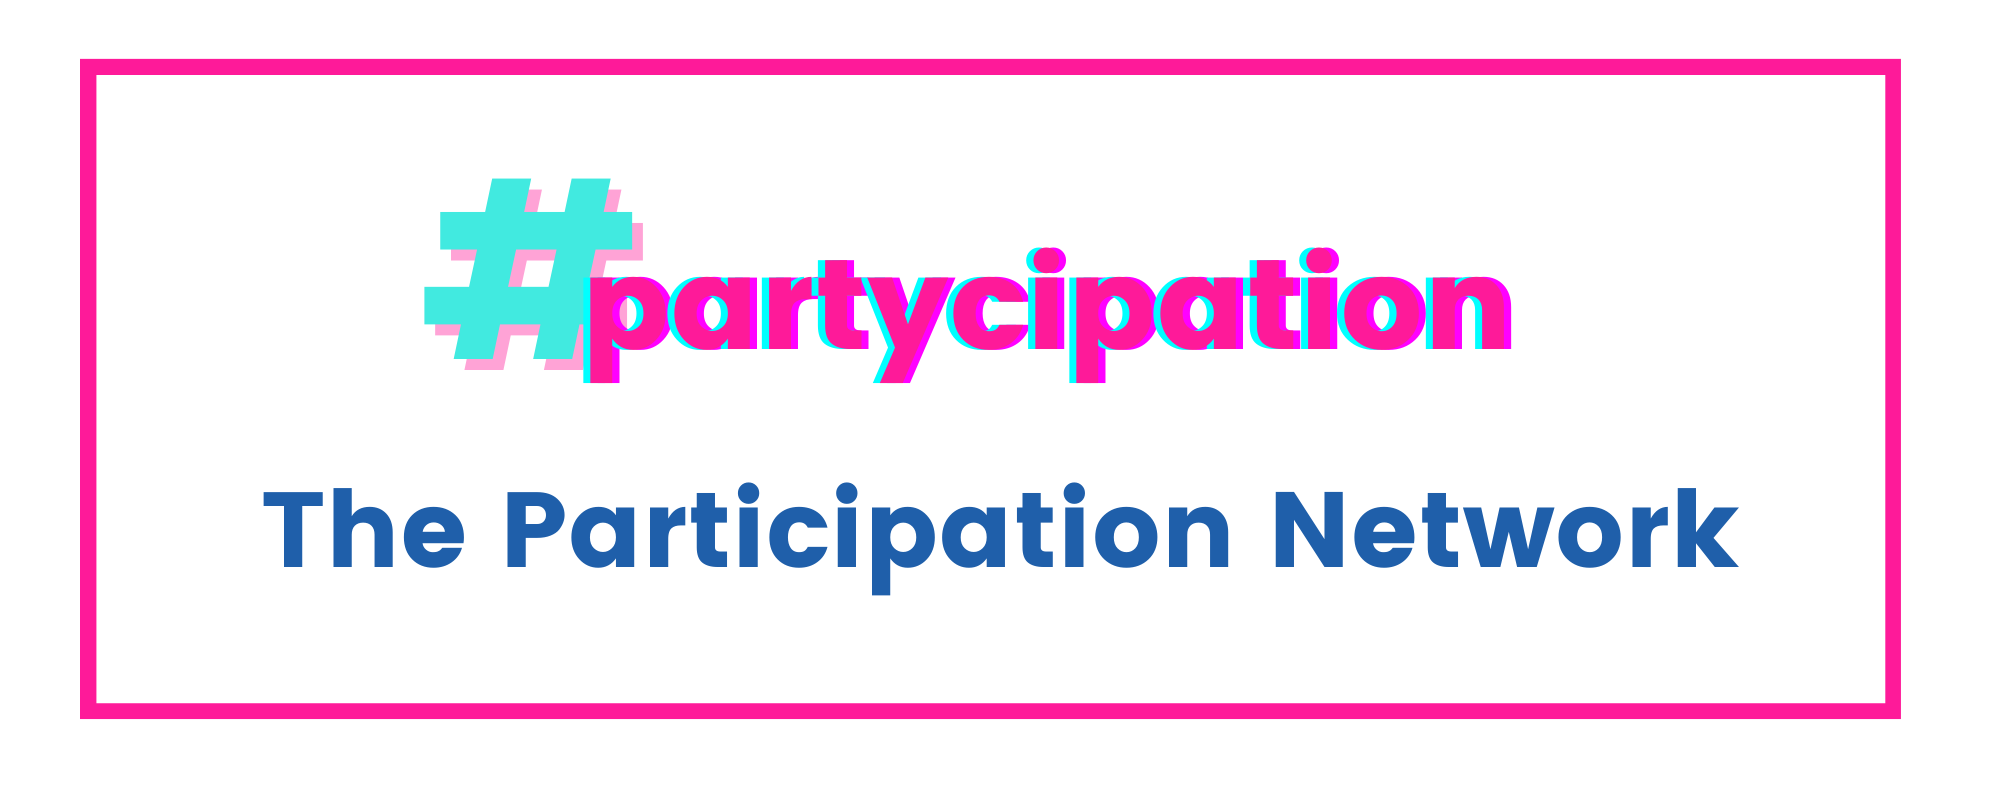 The Participation Network